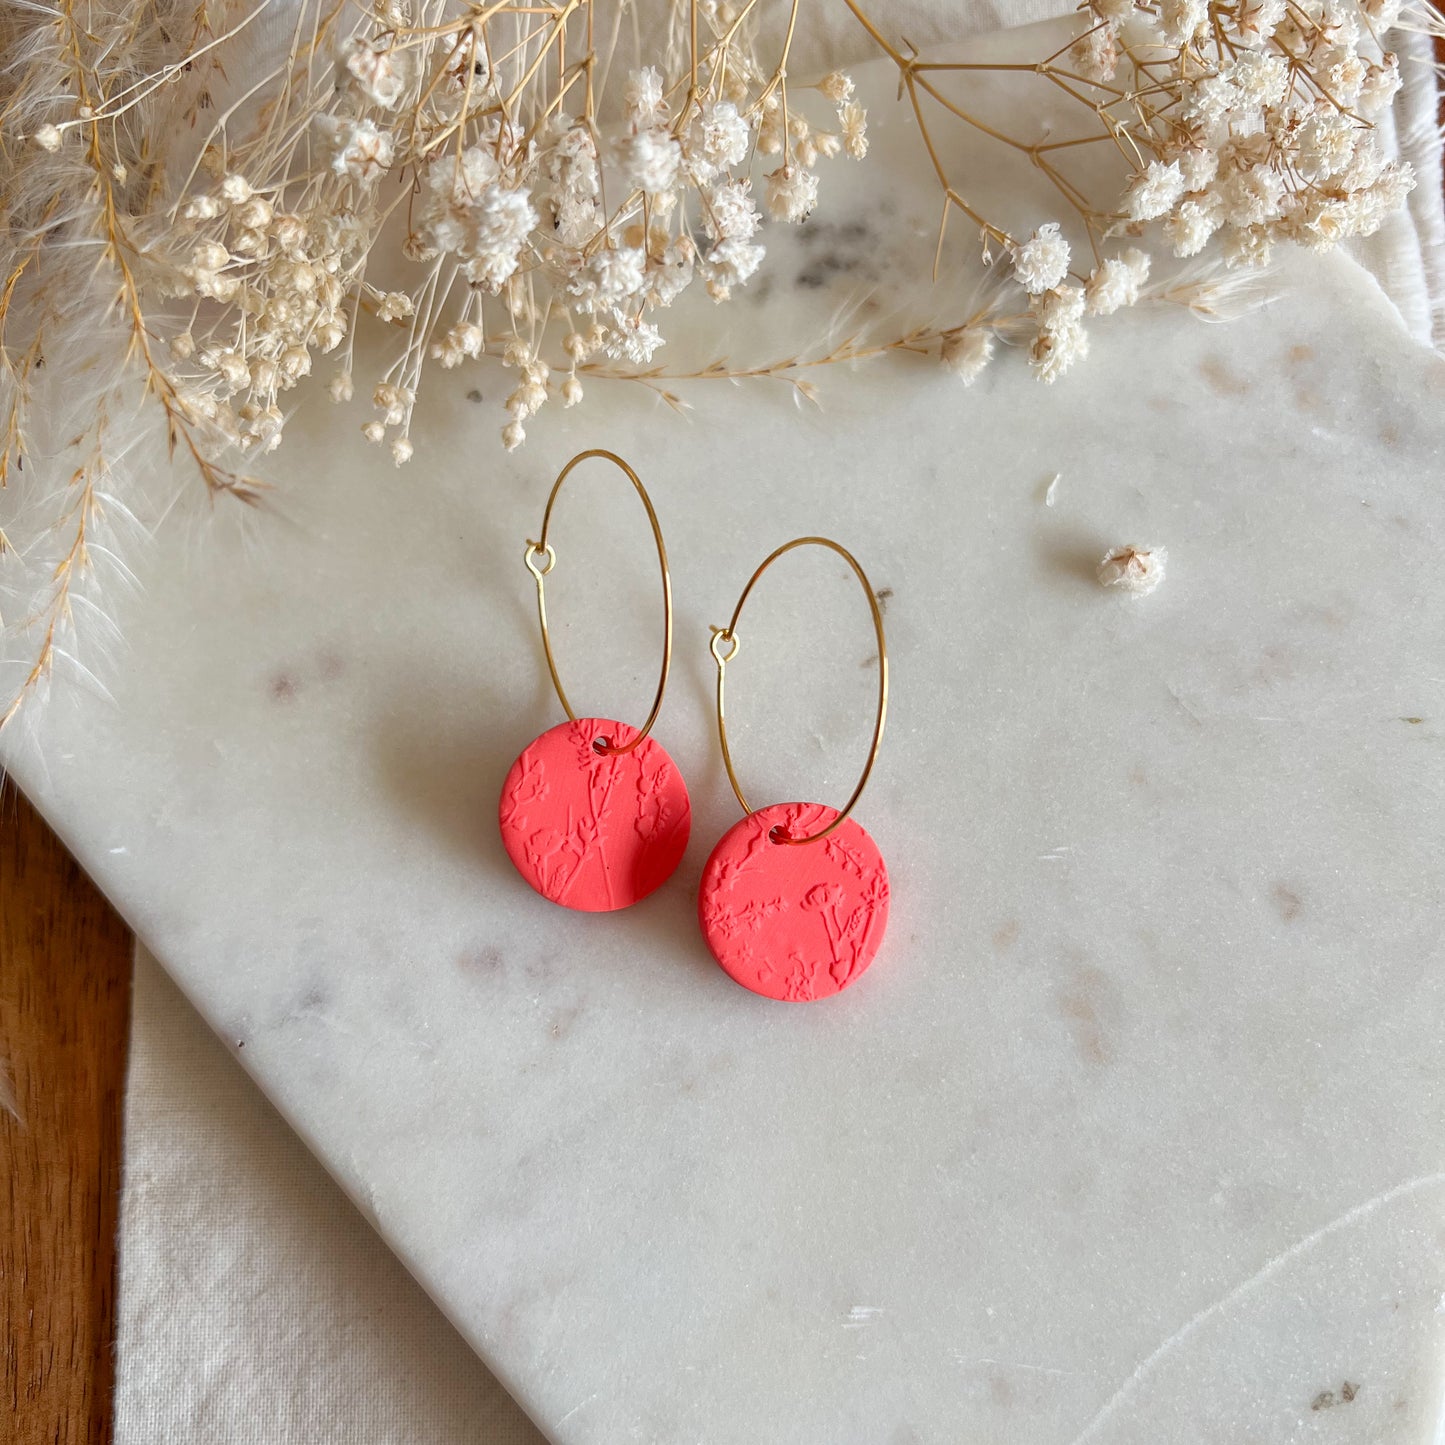 HIGAN KELGH | round drop on 30mm hoop earrings in blossom textured bright coral red